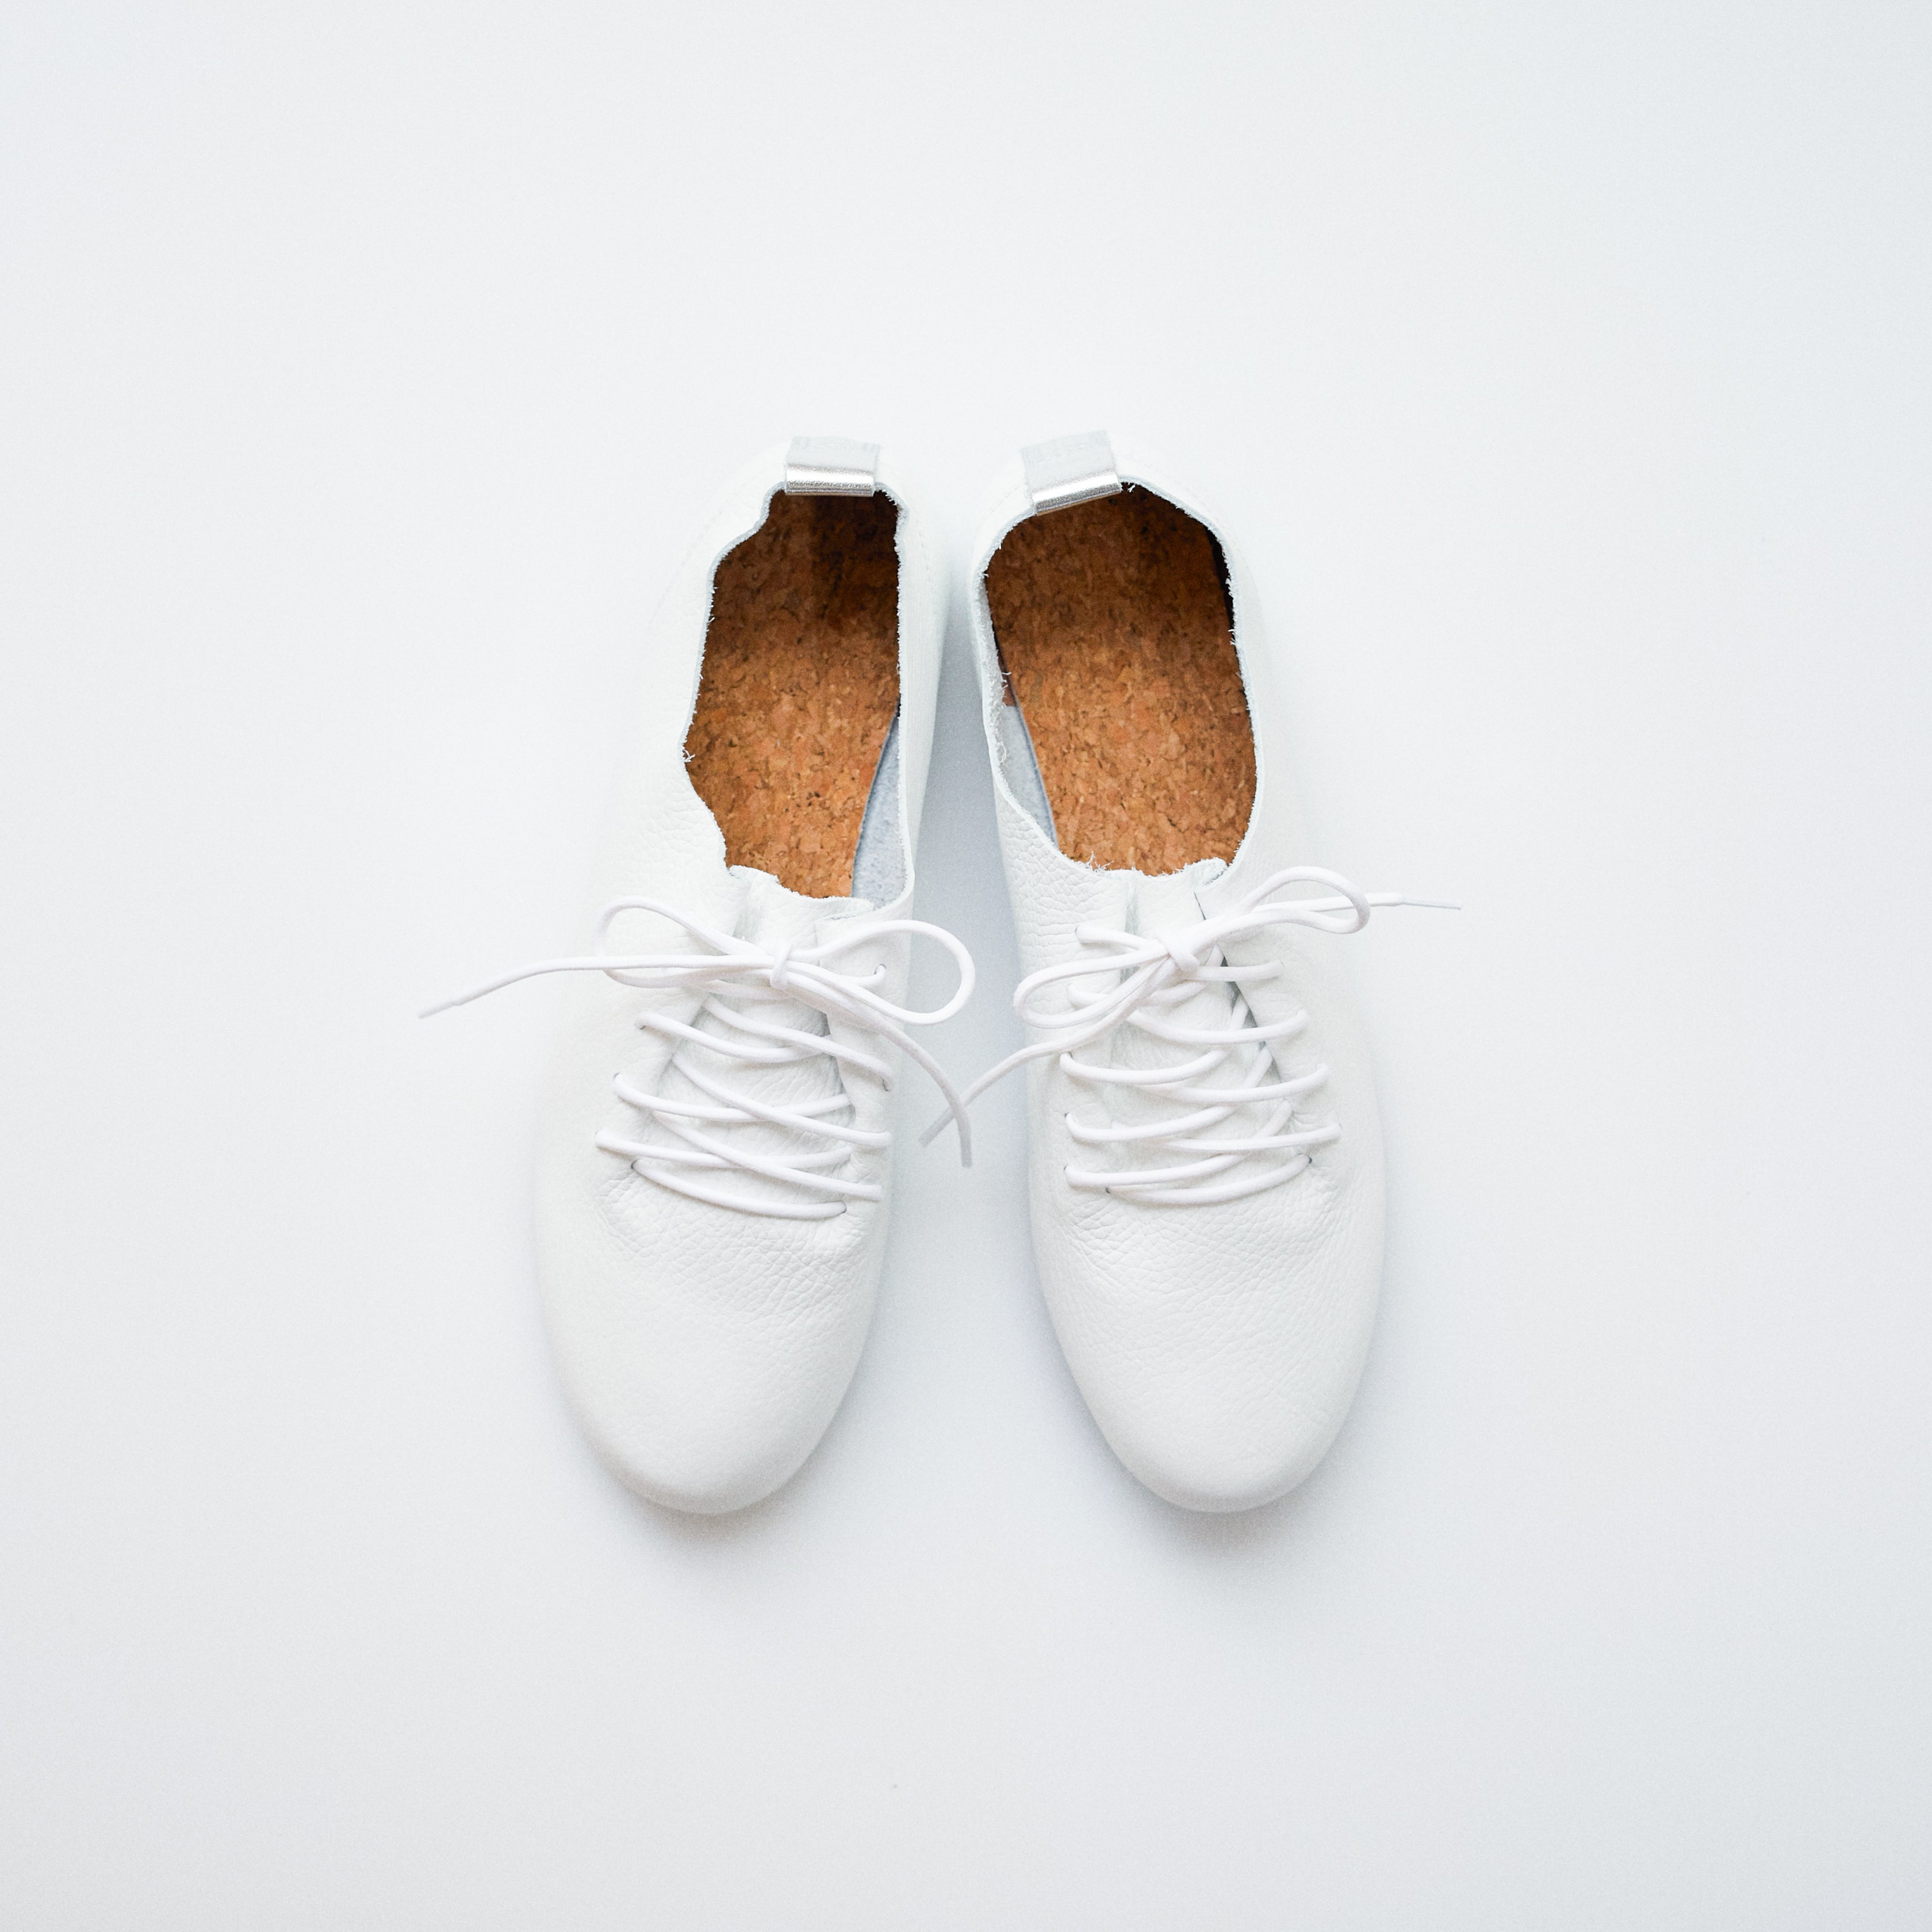 Lace Up Shoes Japan made – SWAAN4RLBERG スワンアルバーグ T-shirtsのような靴